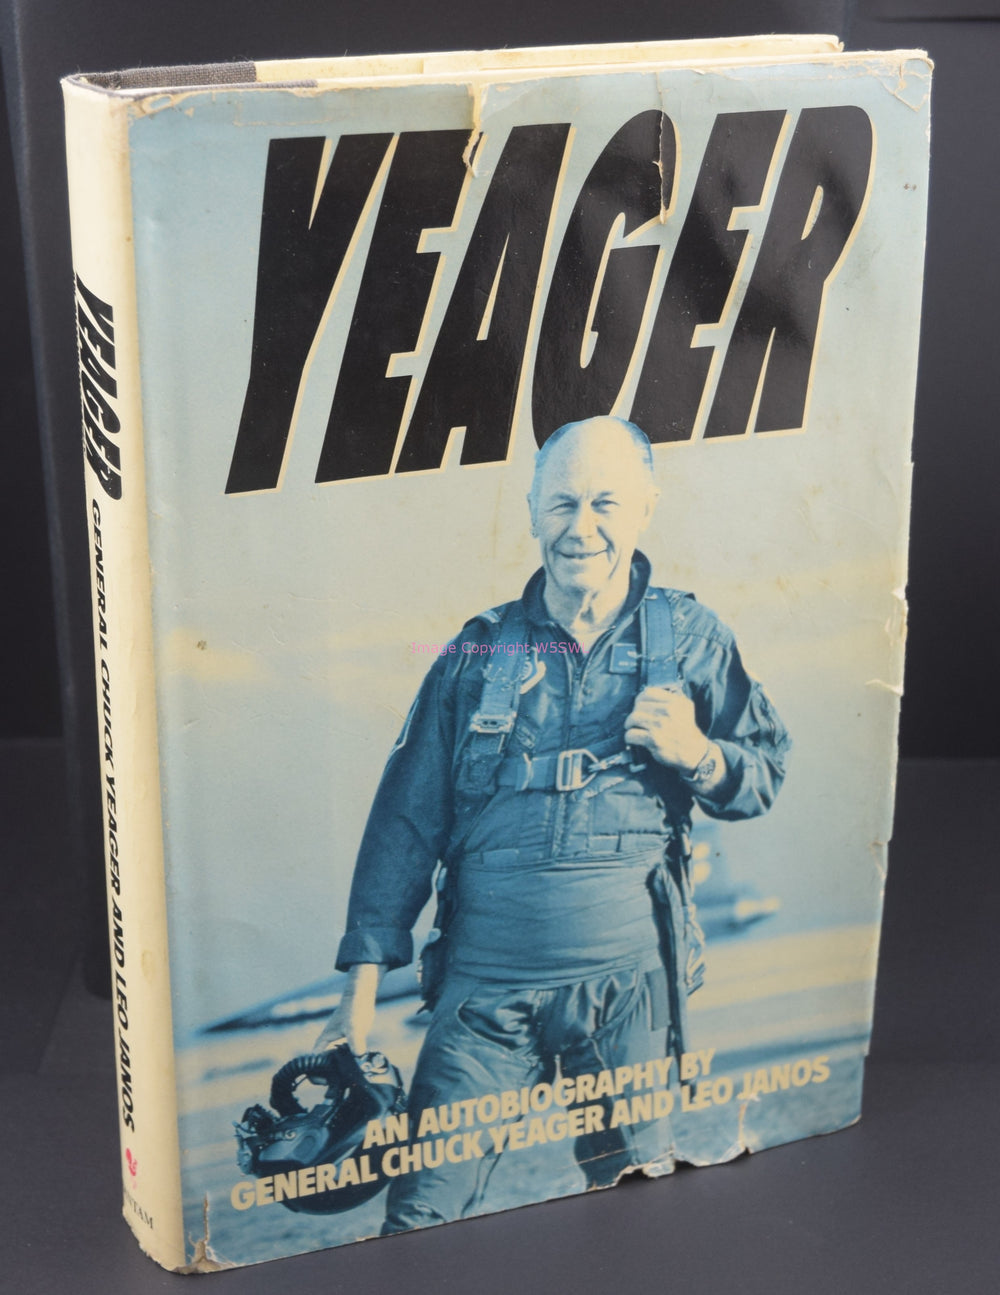 Yeager - An Autobiography by General Chuck Yeager and Leo Janos - Dave's Hobby Shop by W5SWL